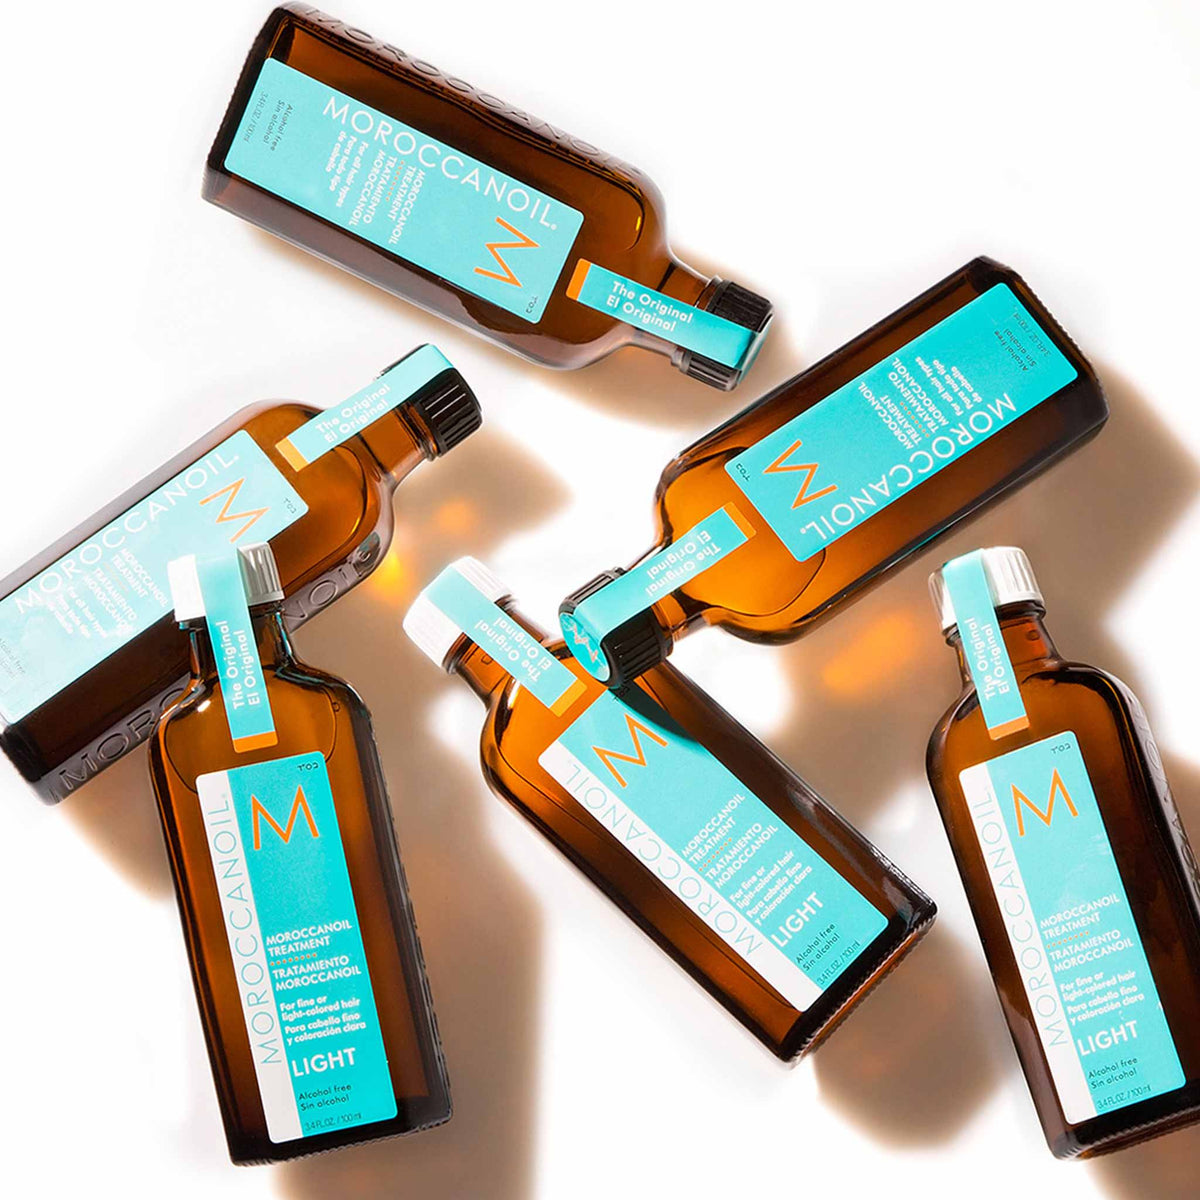 Moroccanoil Moroccanoil Treatment Light . This product is for blonde hair